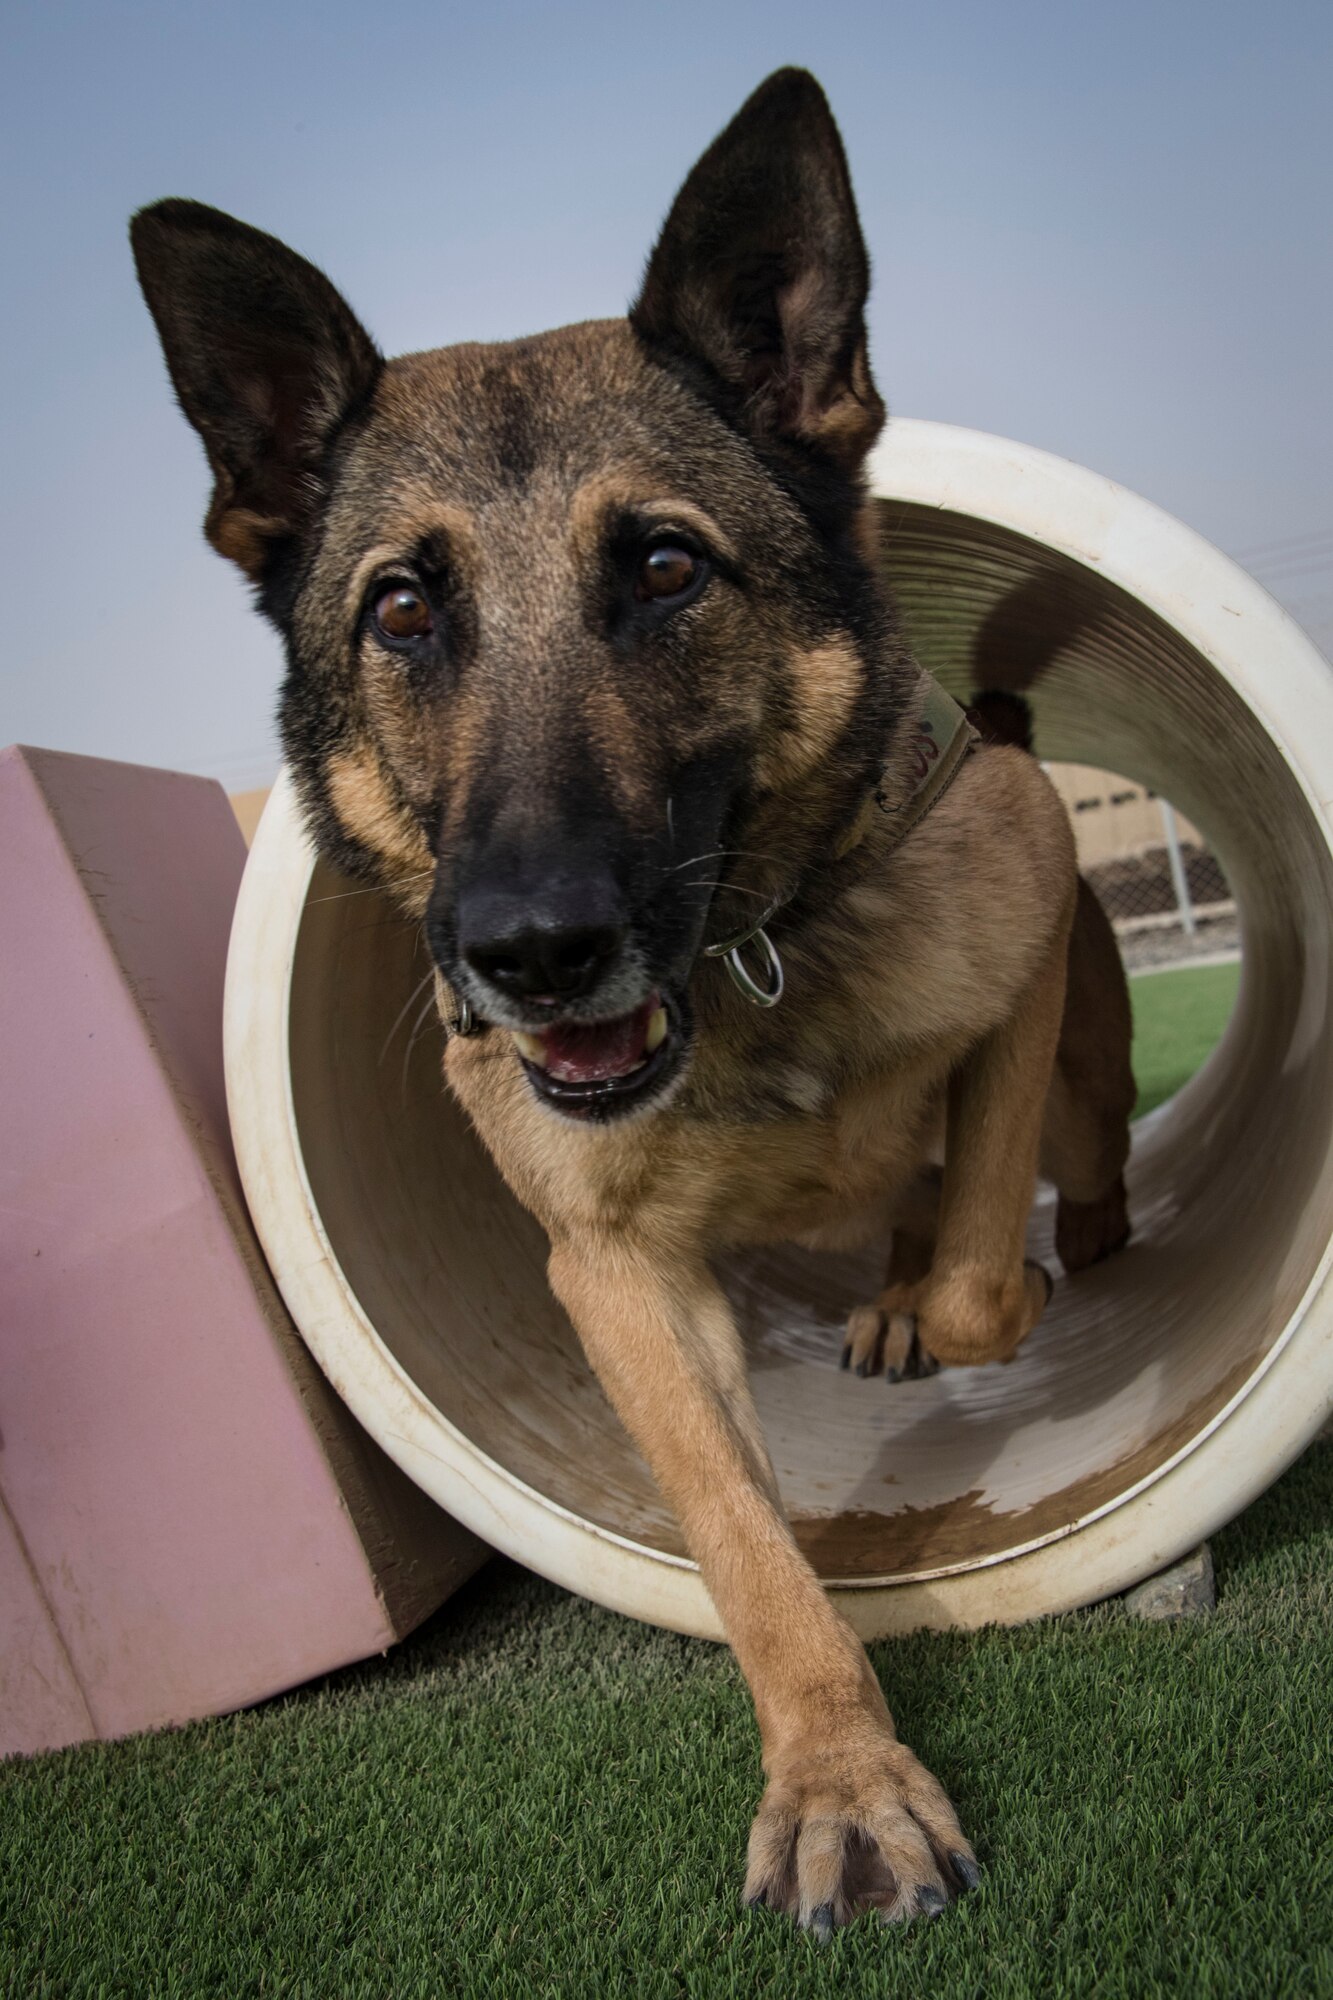 U.S. Air Force military working dog Eros navigates an obstacle course during a warm-up exercise at the 380th Air Expeditionary Squadron K-9 facility before going on patrol, Al Dhafra Air Base, United Arab Emirates, May 14, 2018. (U.S. Air National Guard photo by Tech. Sgt. Nieko Carzis)